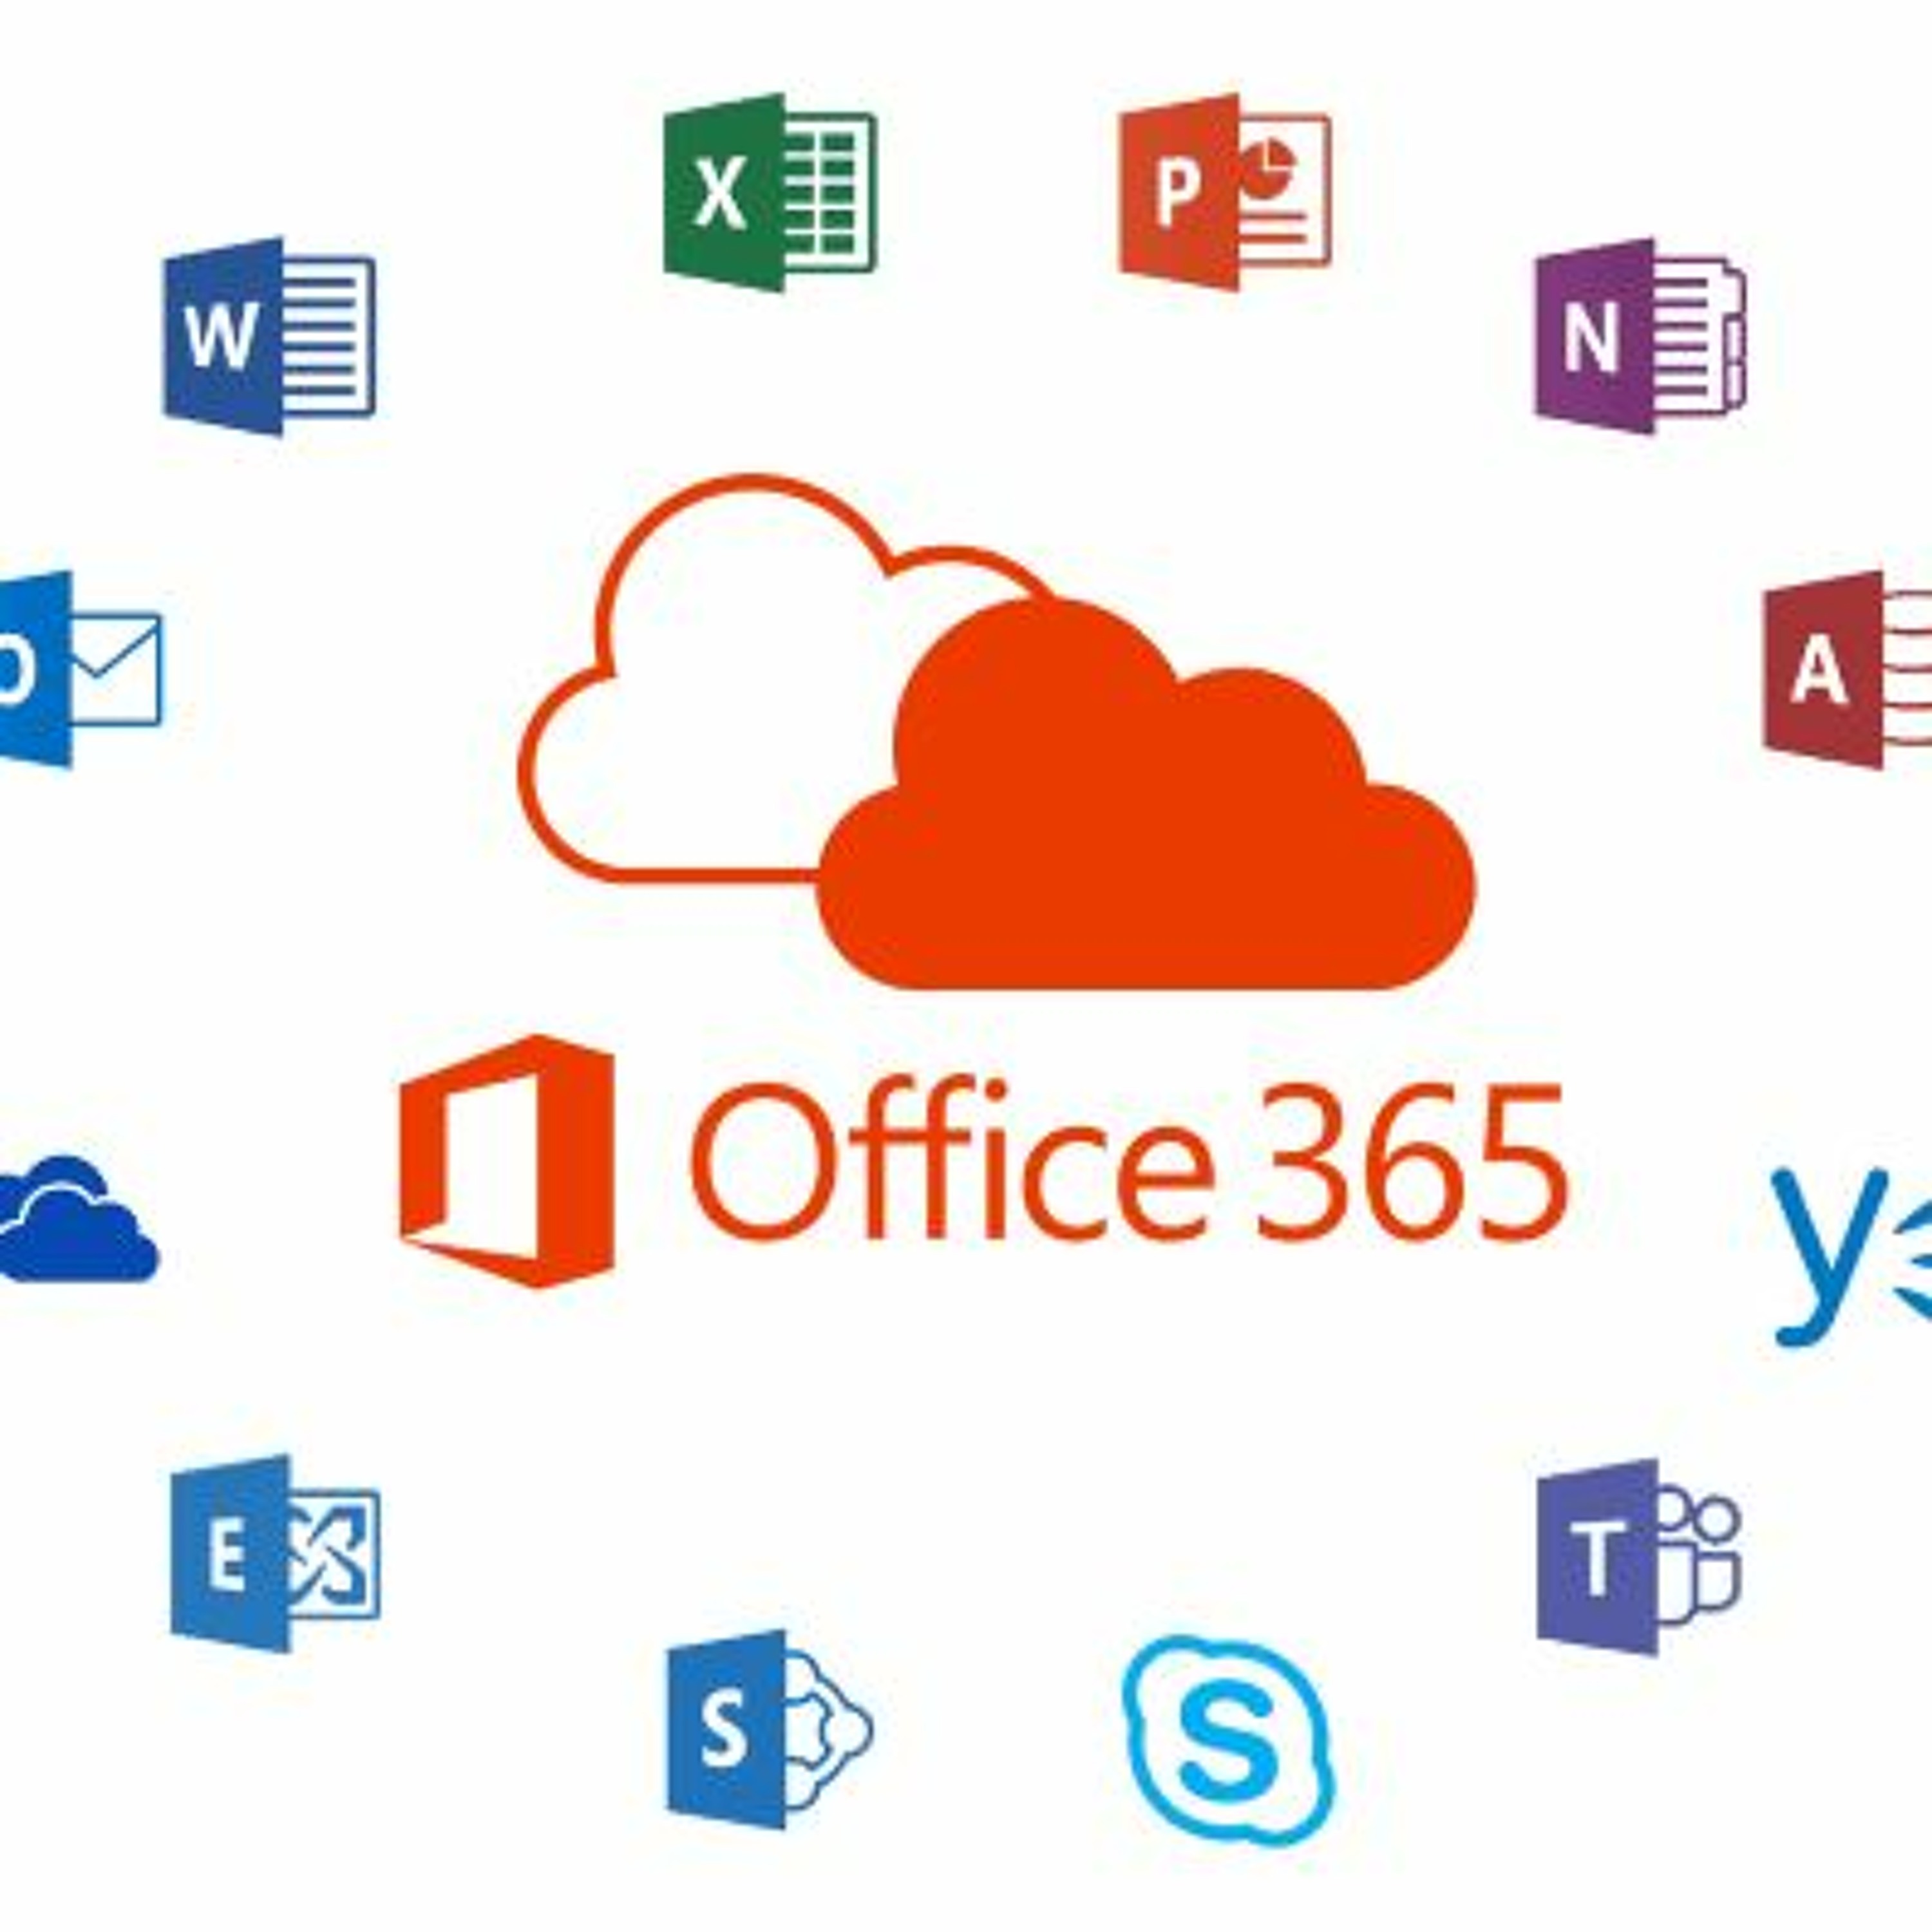 What Is Office 365? - The Journey By Astoria 喜 马 拉 雅 国 际 版 Himalaya